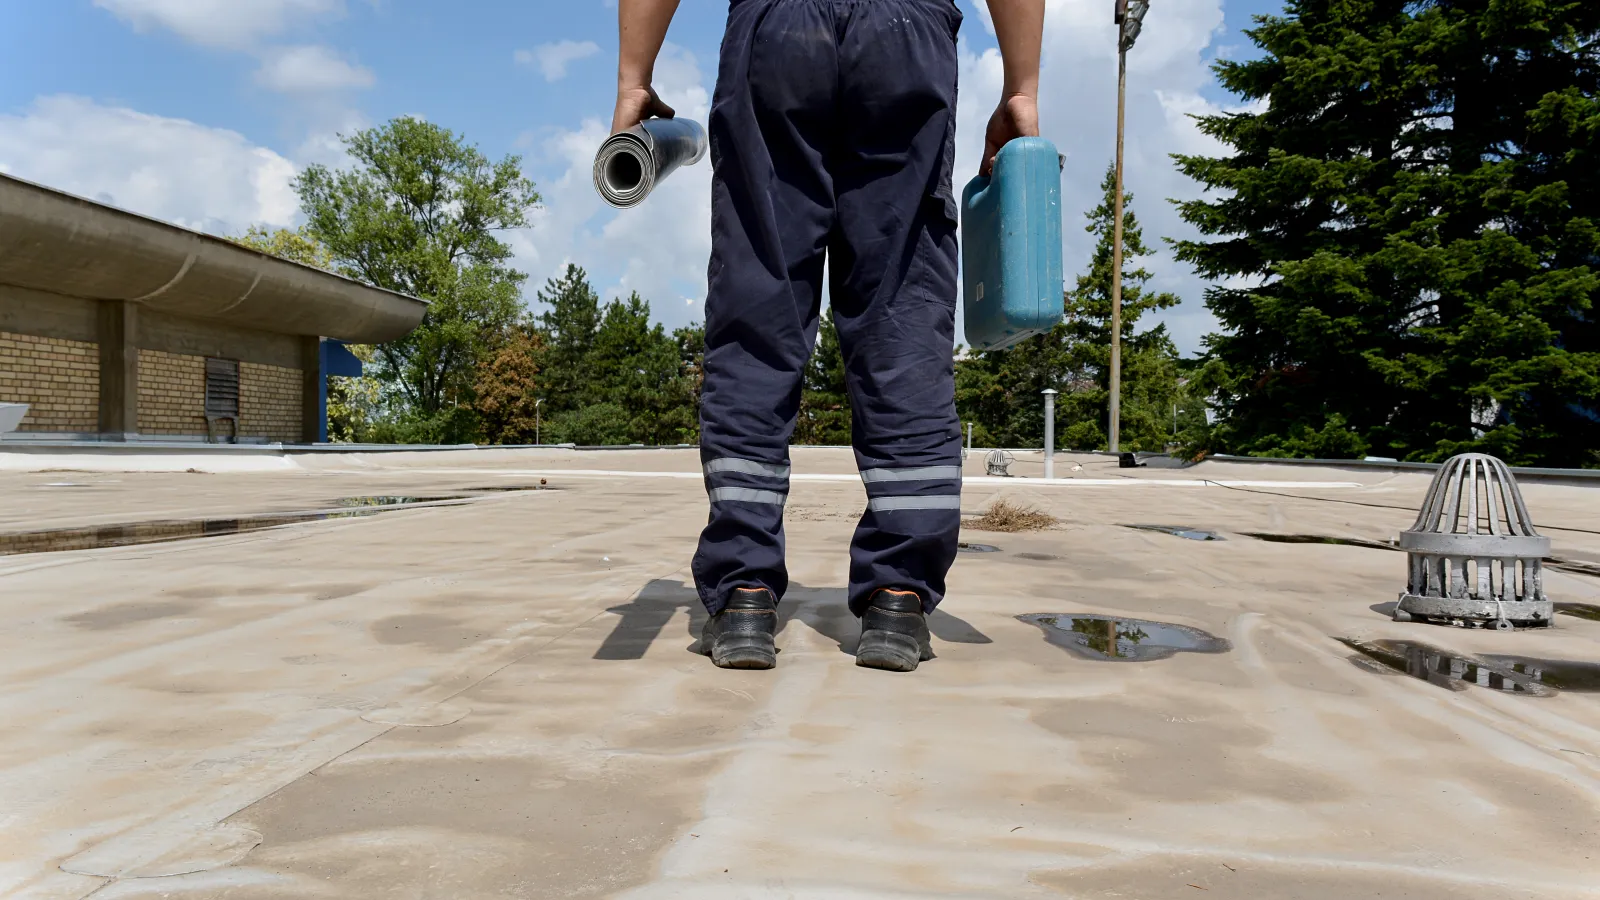 A roofing employee standing on a roof